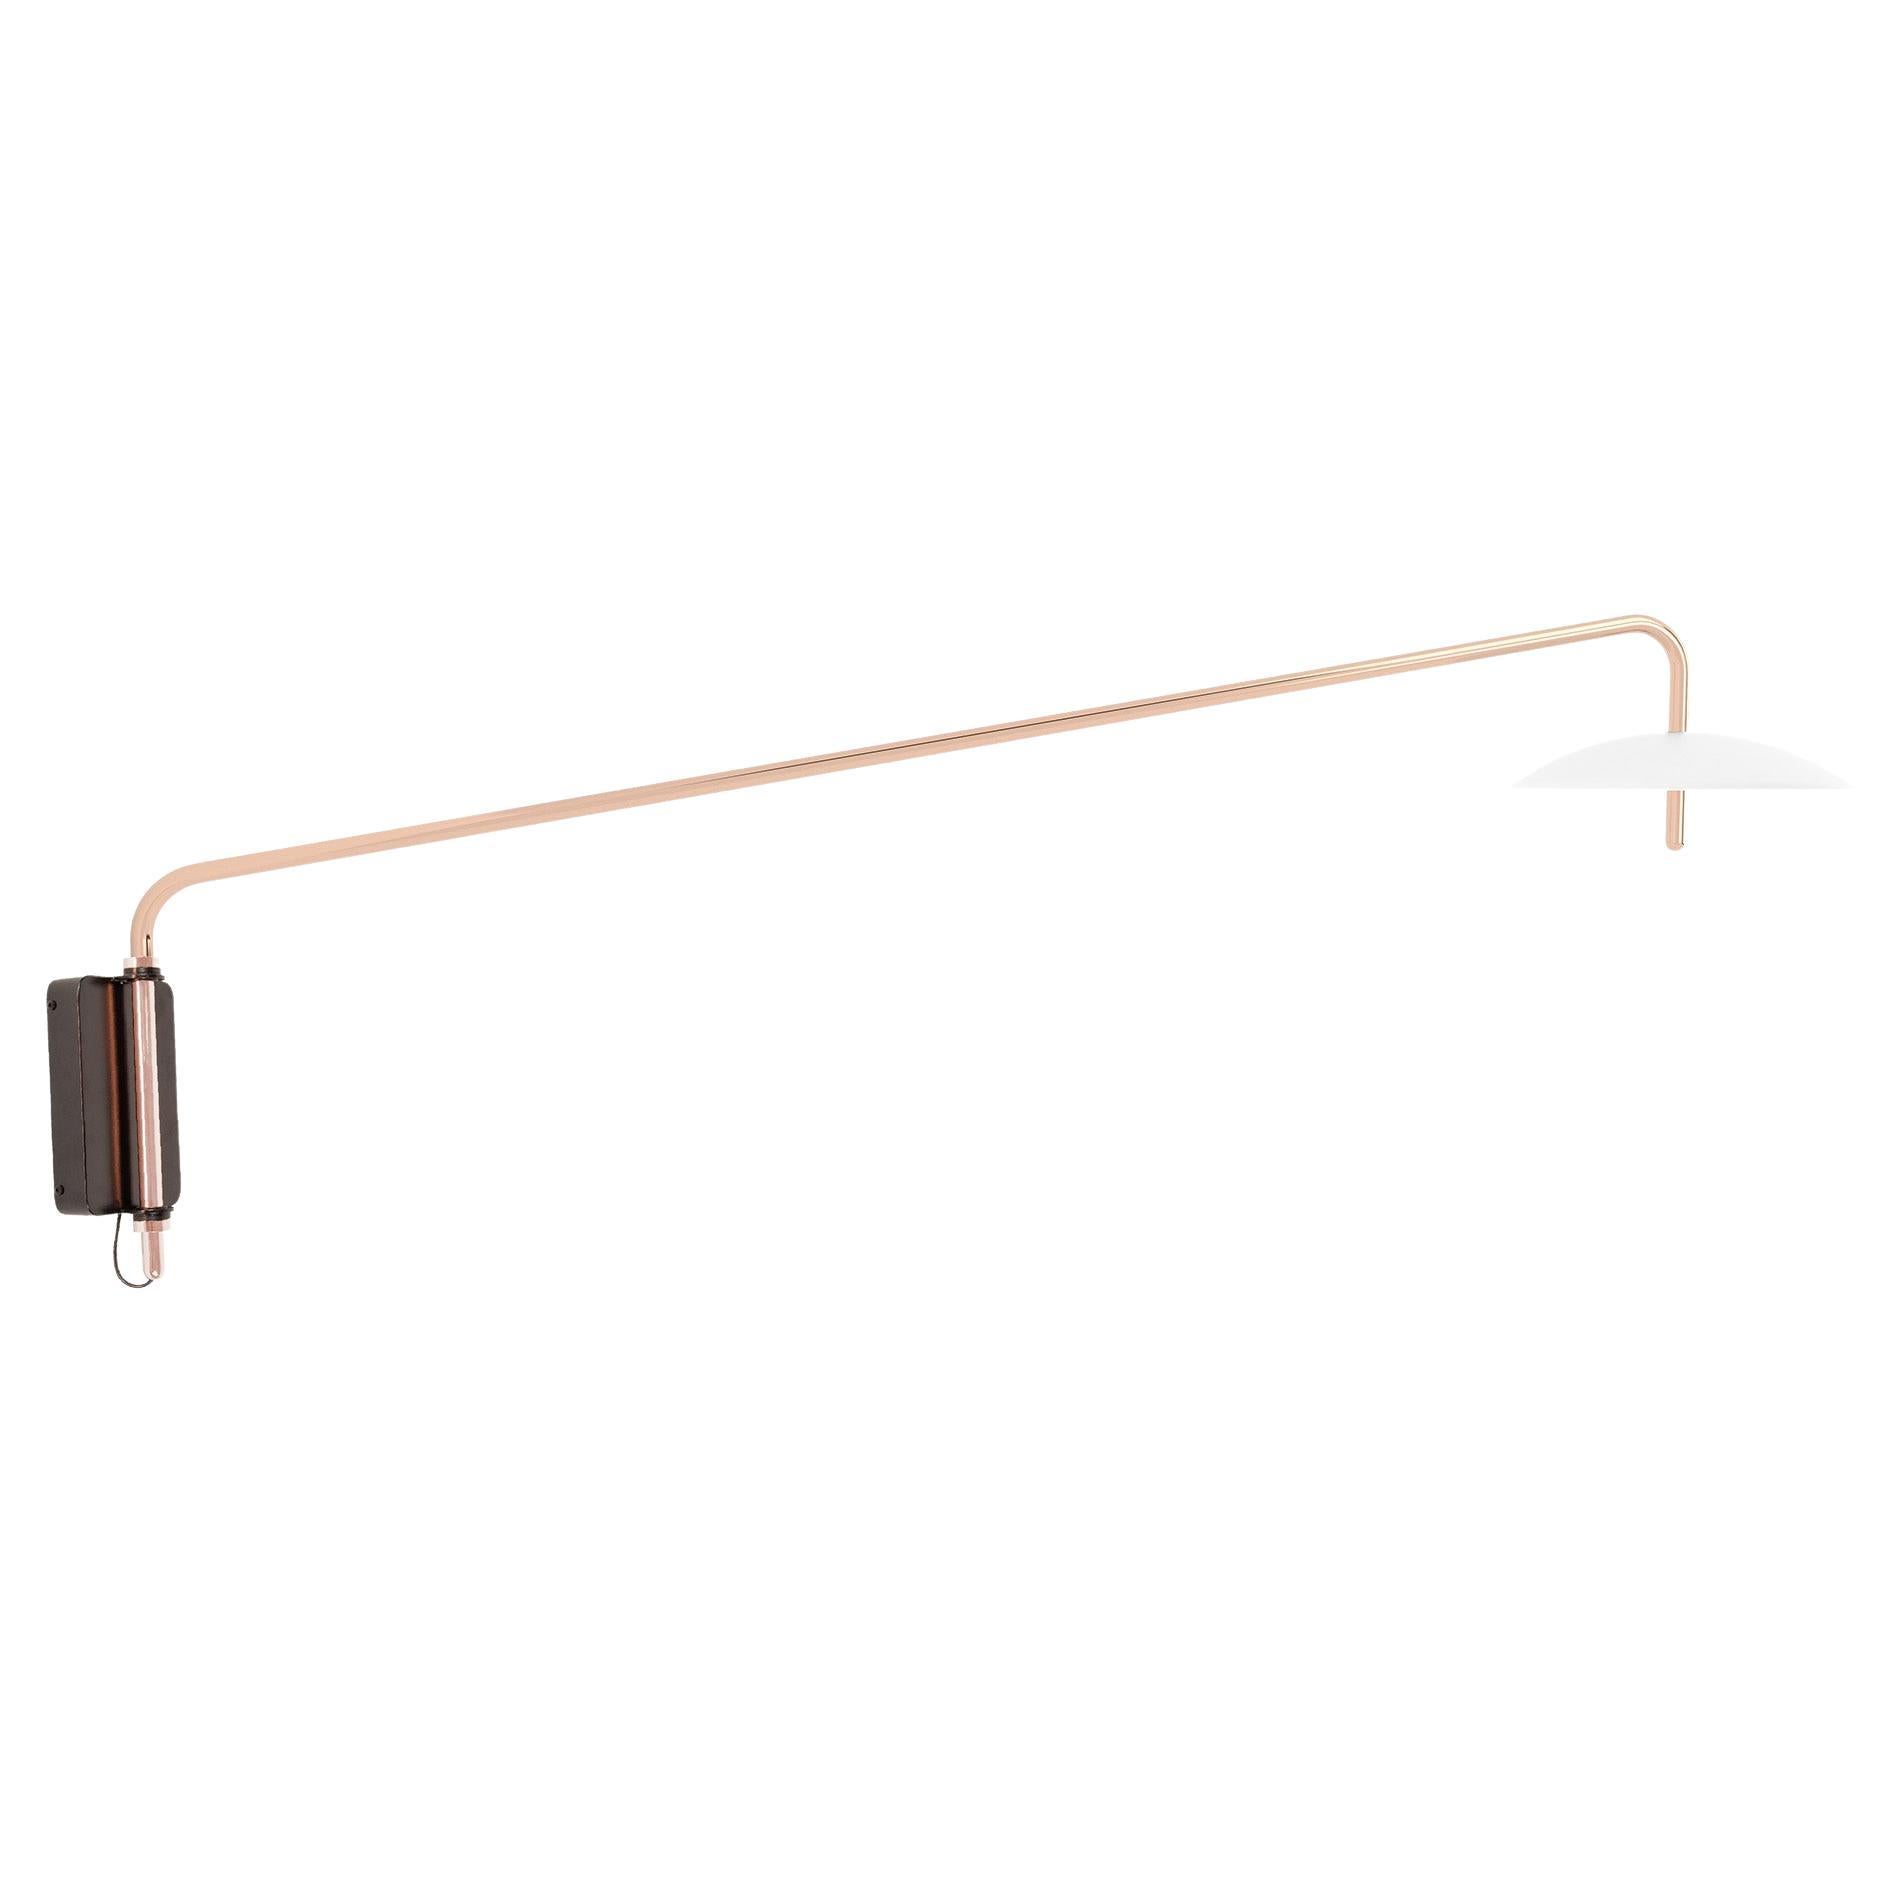 Signal Arm Sconce in White x Copper, Long, Hardwire, by Souda, Made to Order For Sale